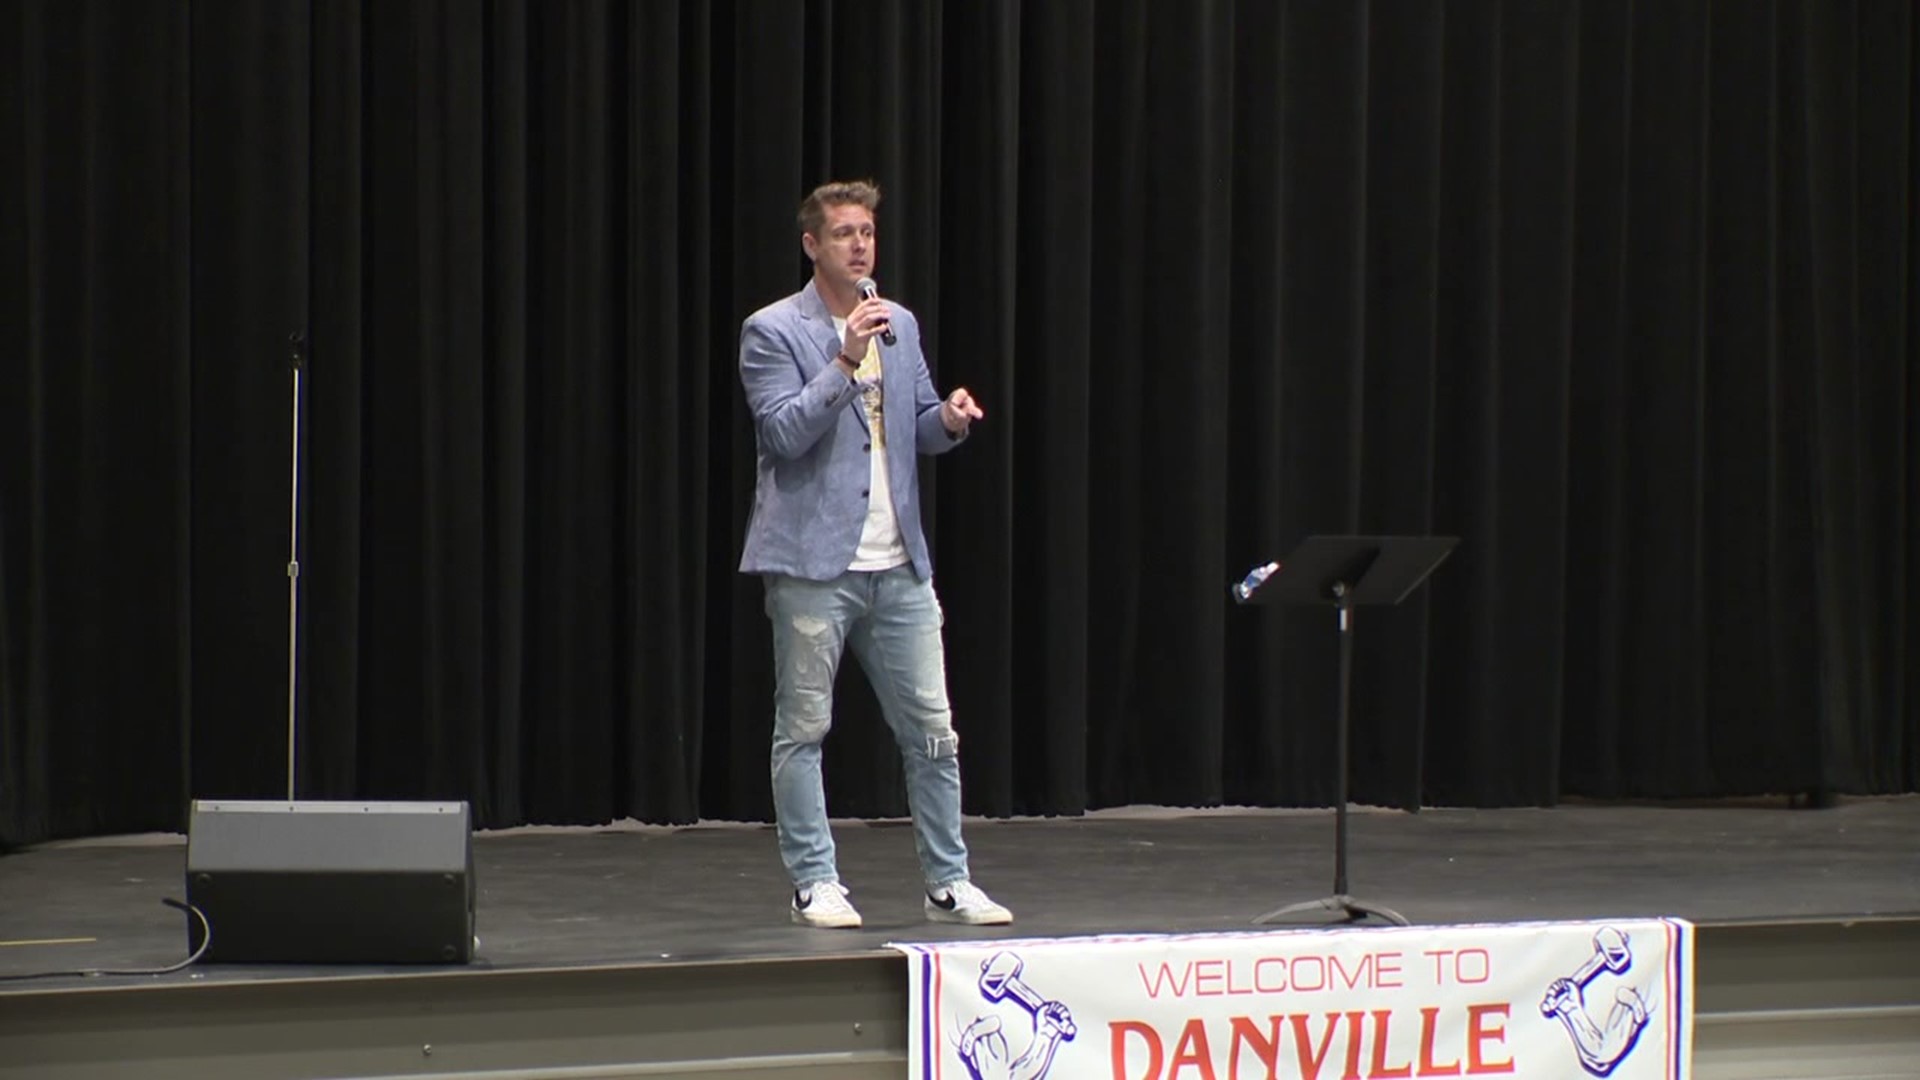 Danville Area High School's mental health club raised money to bring a motivational speaker to the district this week. Newswatch 16's Nikki Krize explains.